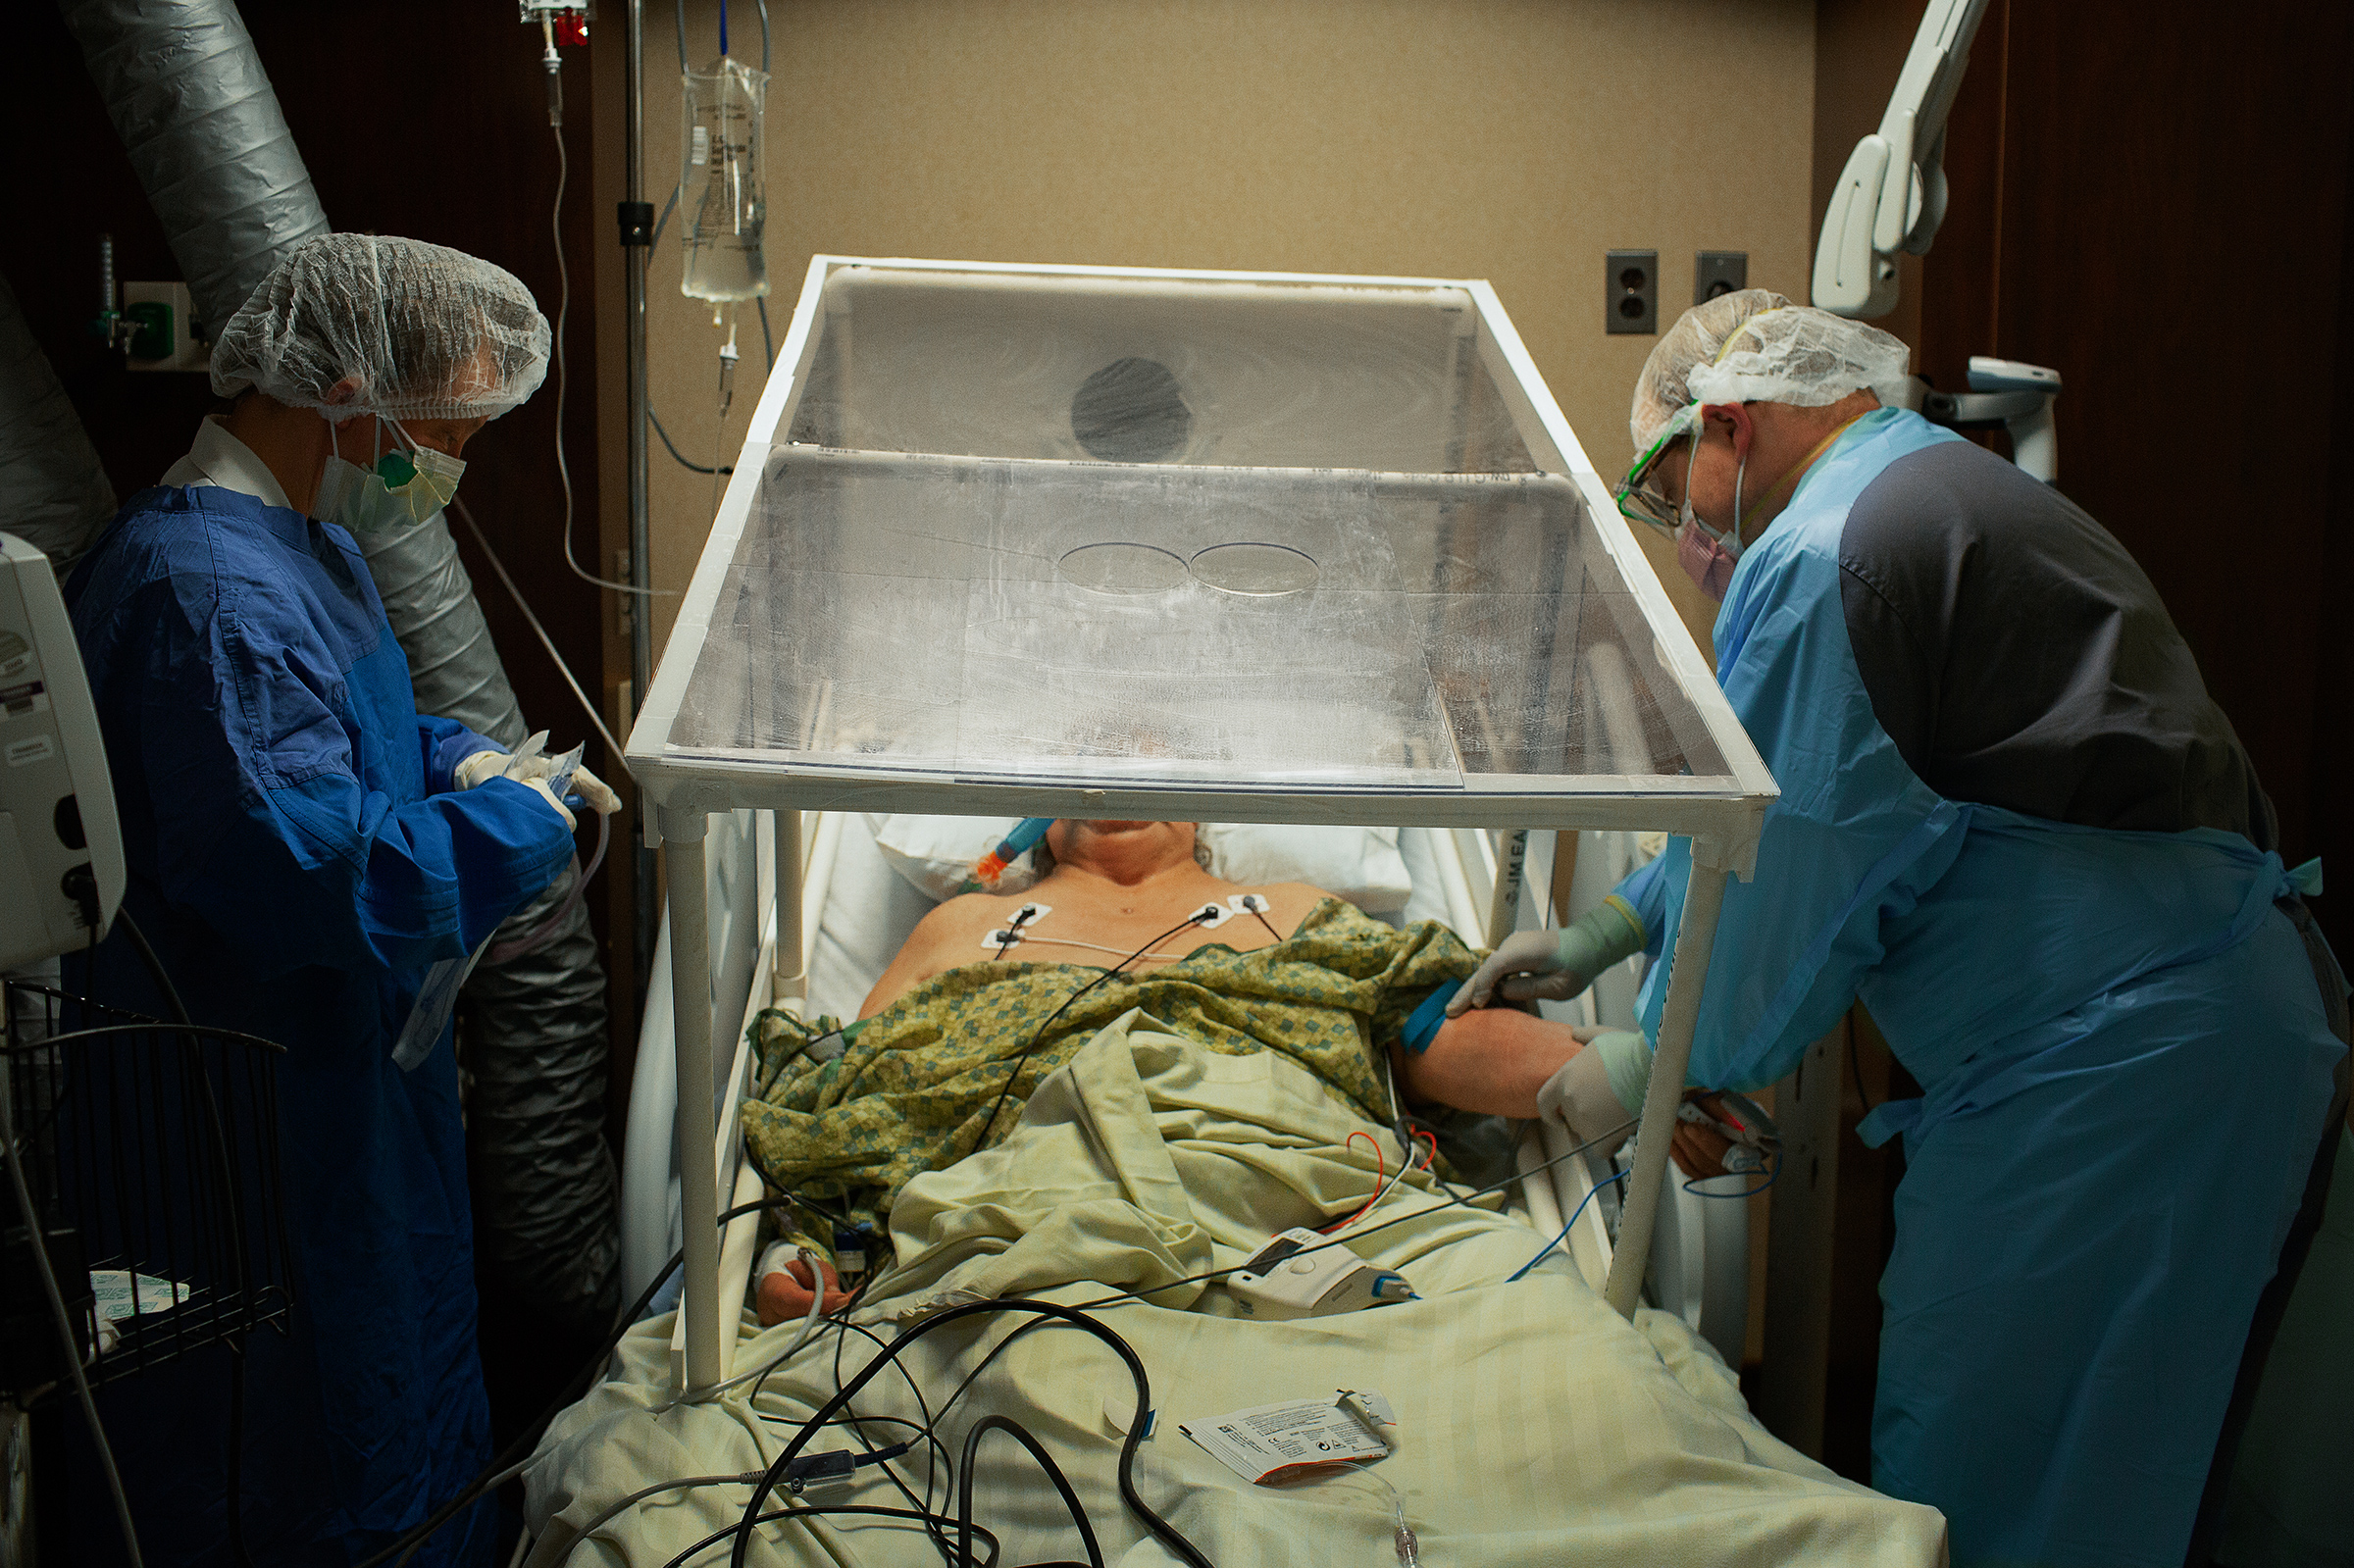 A COVID-19 patient is prepared for intubation by the anesthesiologist at Holy Name Medical Center in Teaneck, N.J., on March 31. The plastic tent is so the virus isn’t spread while transporting the patient between units.